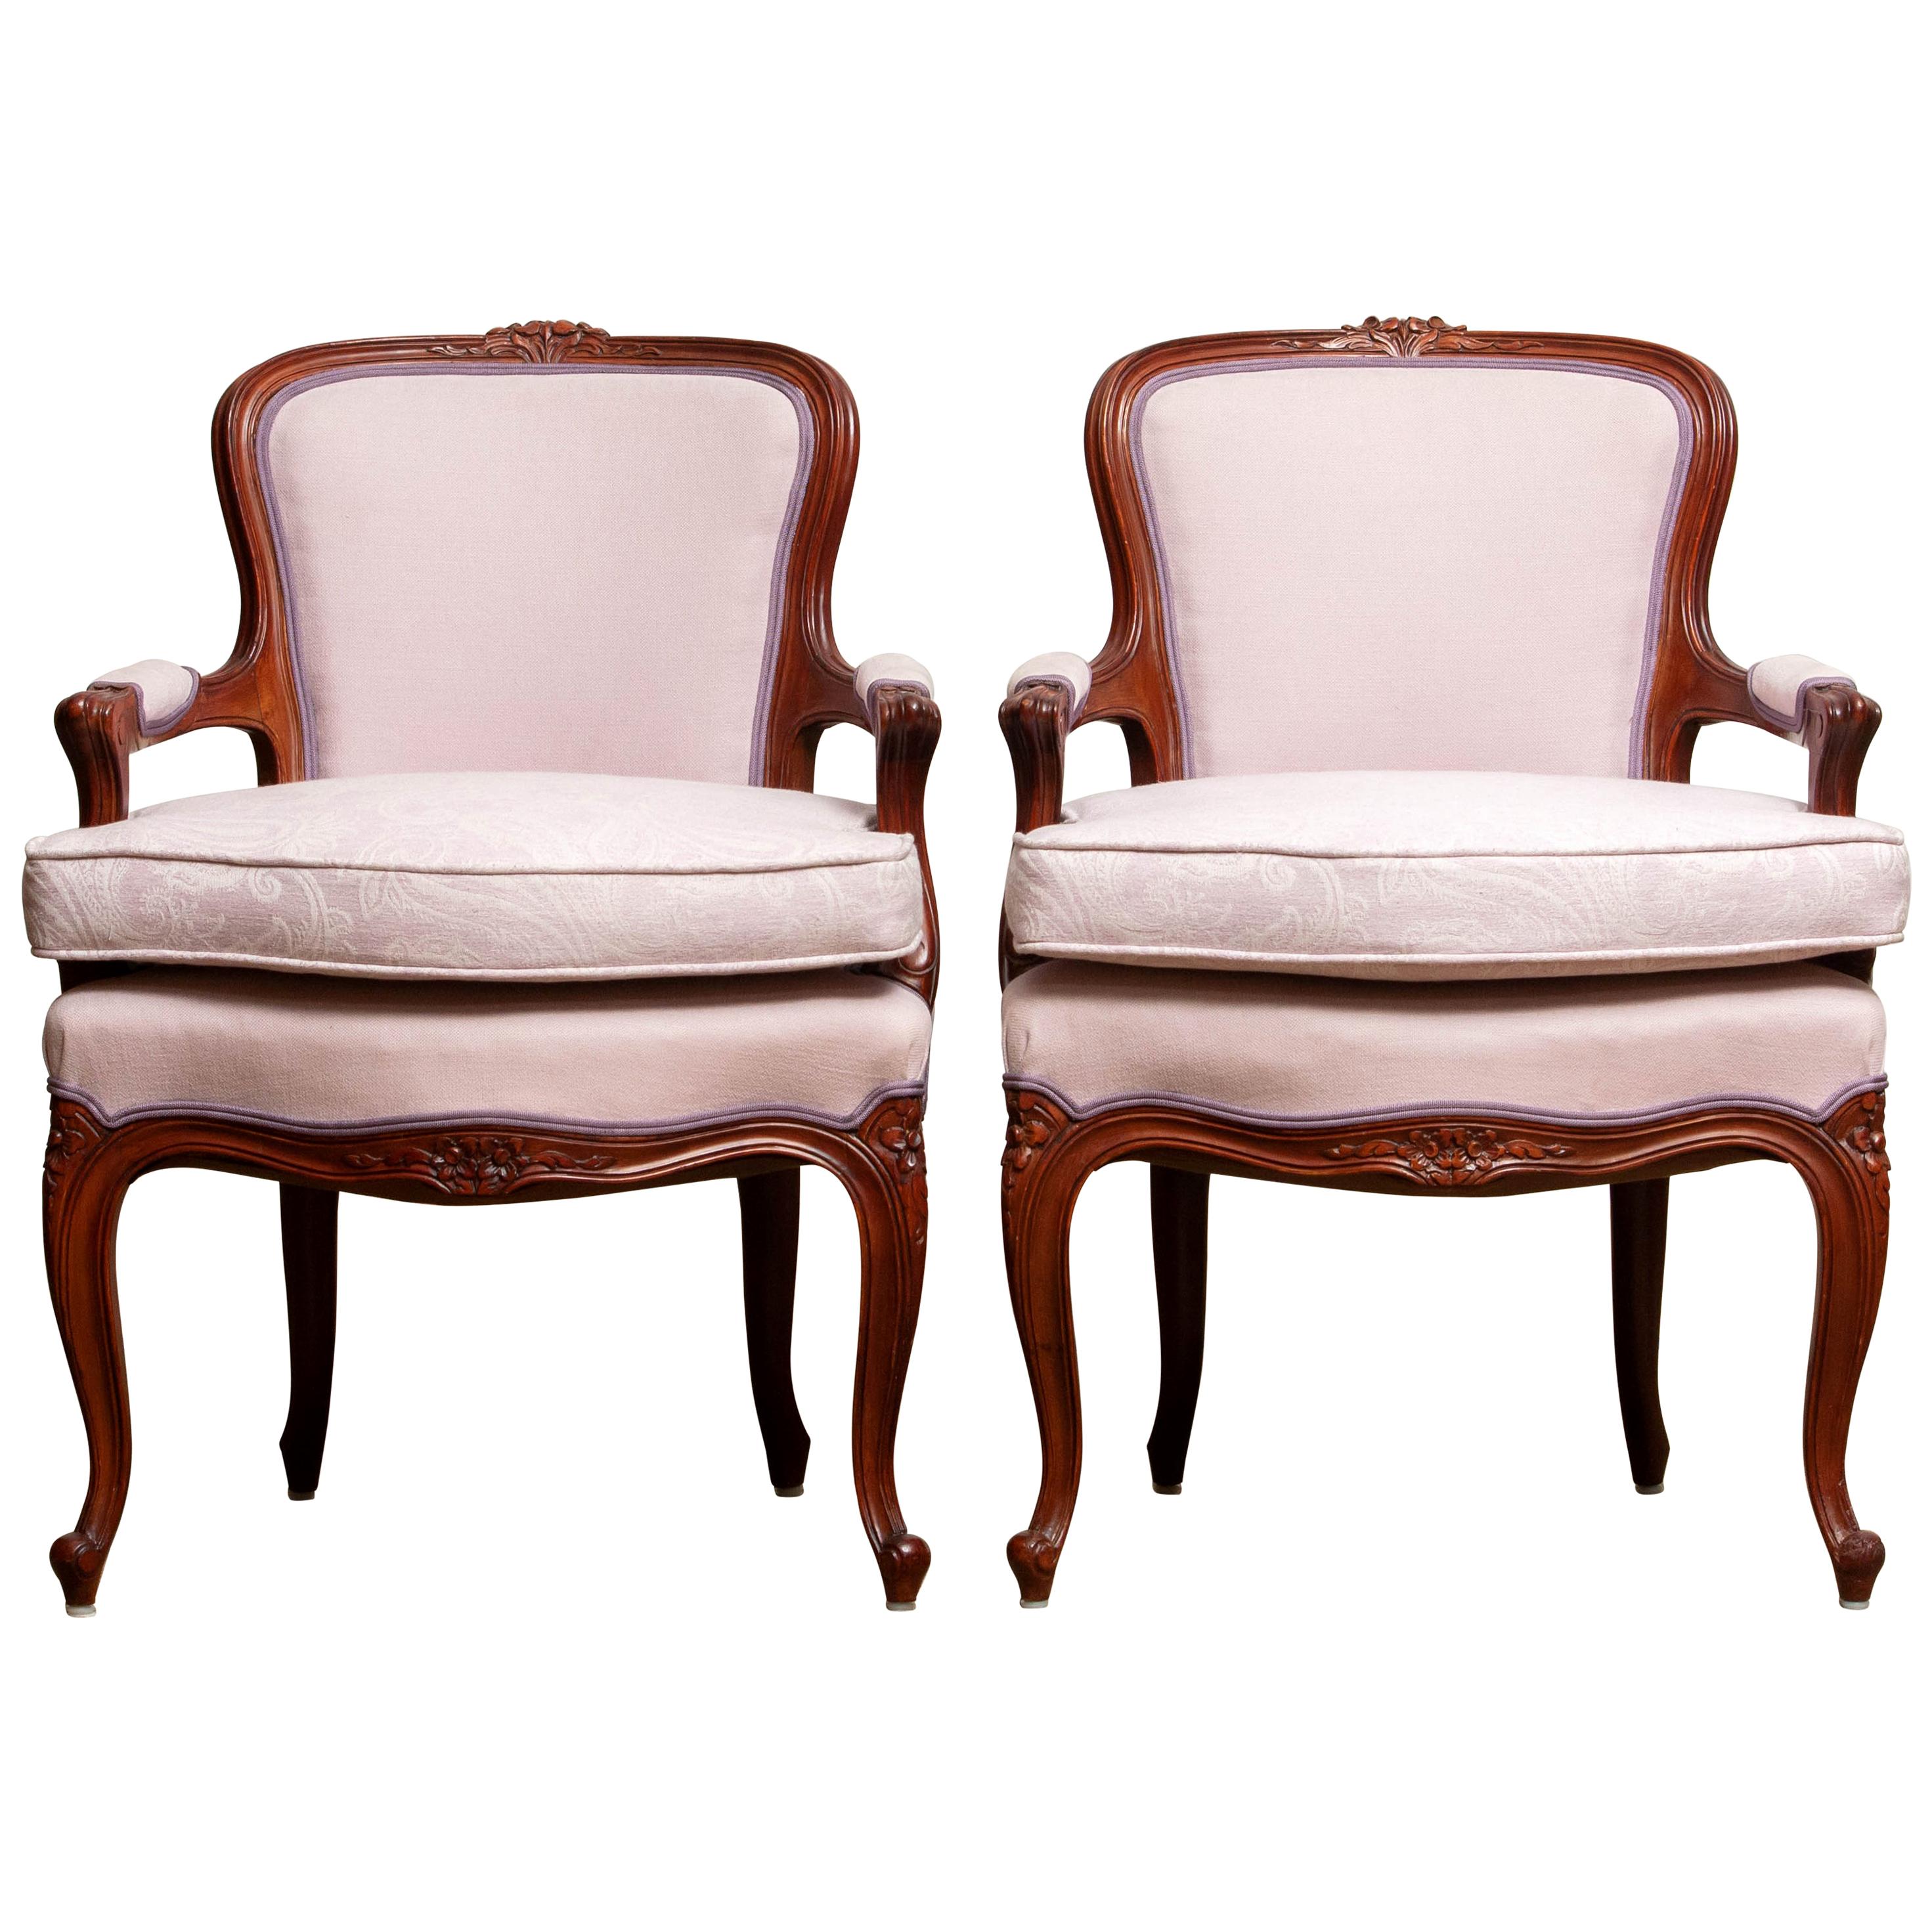 Mid-20th Century 1950s, Pair of Pink Swedish Rococo Bergères in the Shabby Chic Technique Chairs